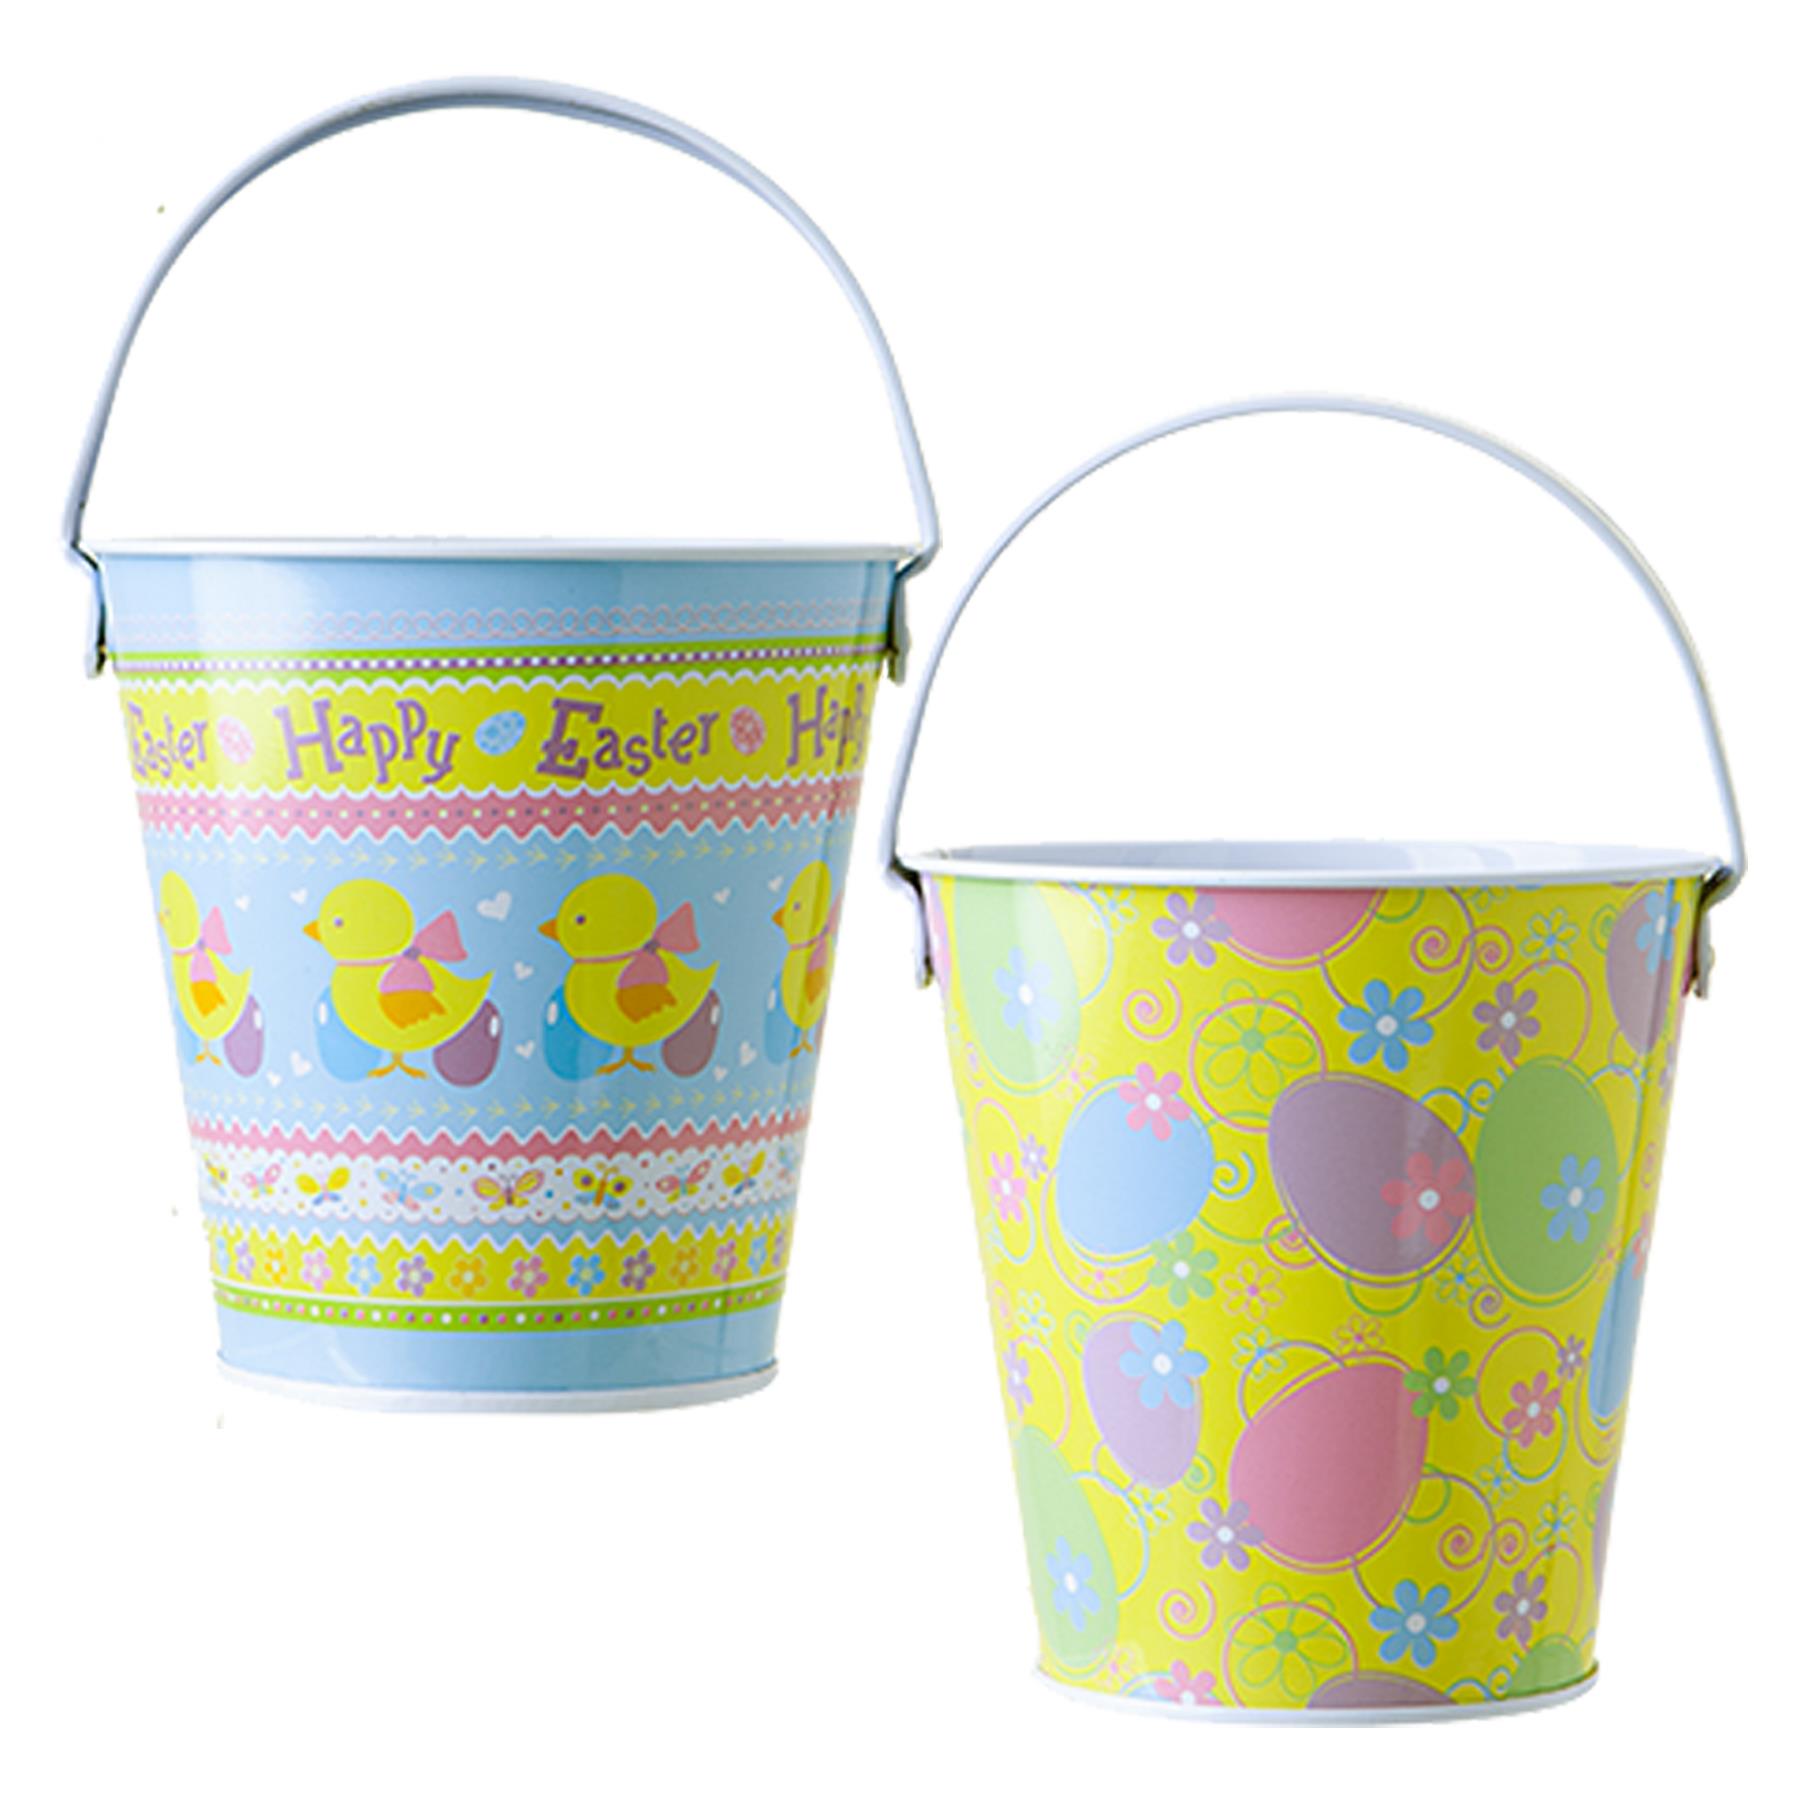 Easter Baskets, Buckets, Accessories - Set of 2 Mini Metal Buckets Egg / Happy Easter